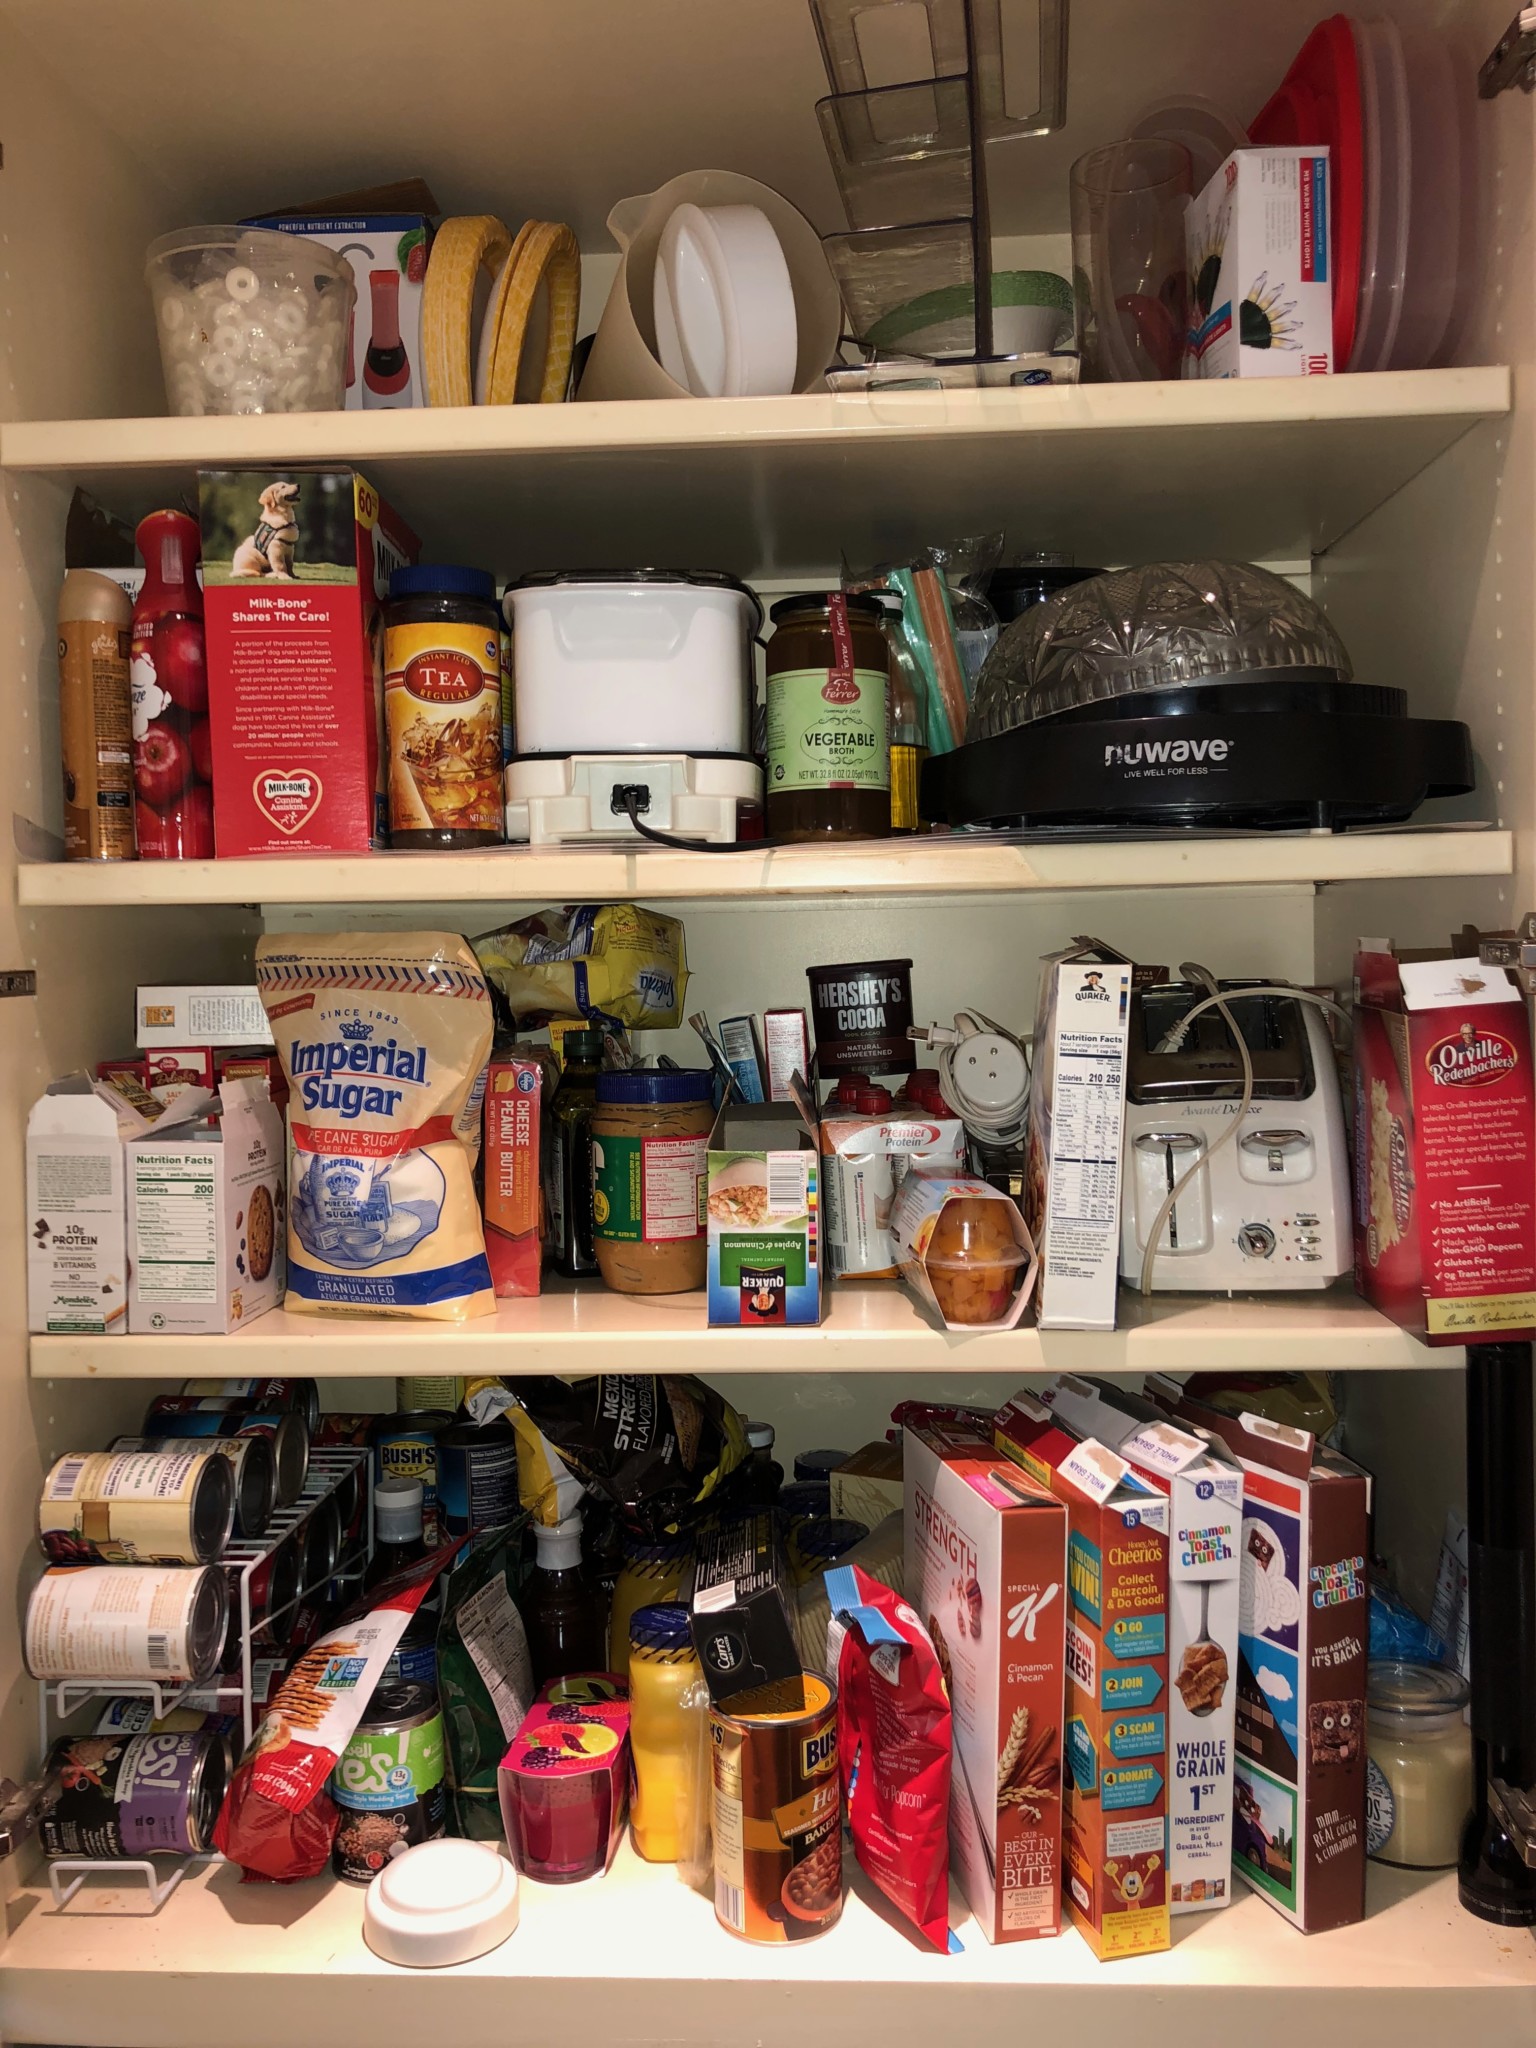 Katy home organizing services - deep pantry before